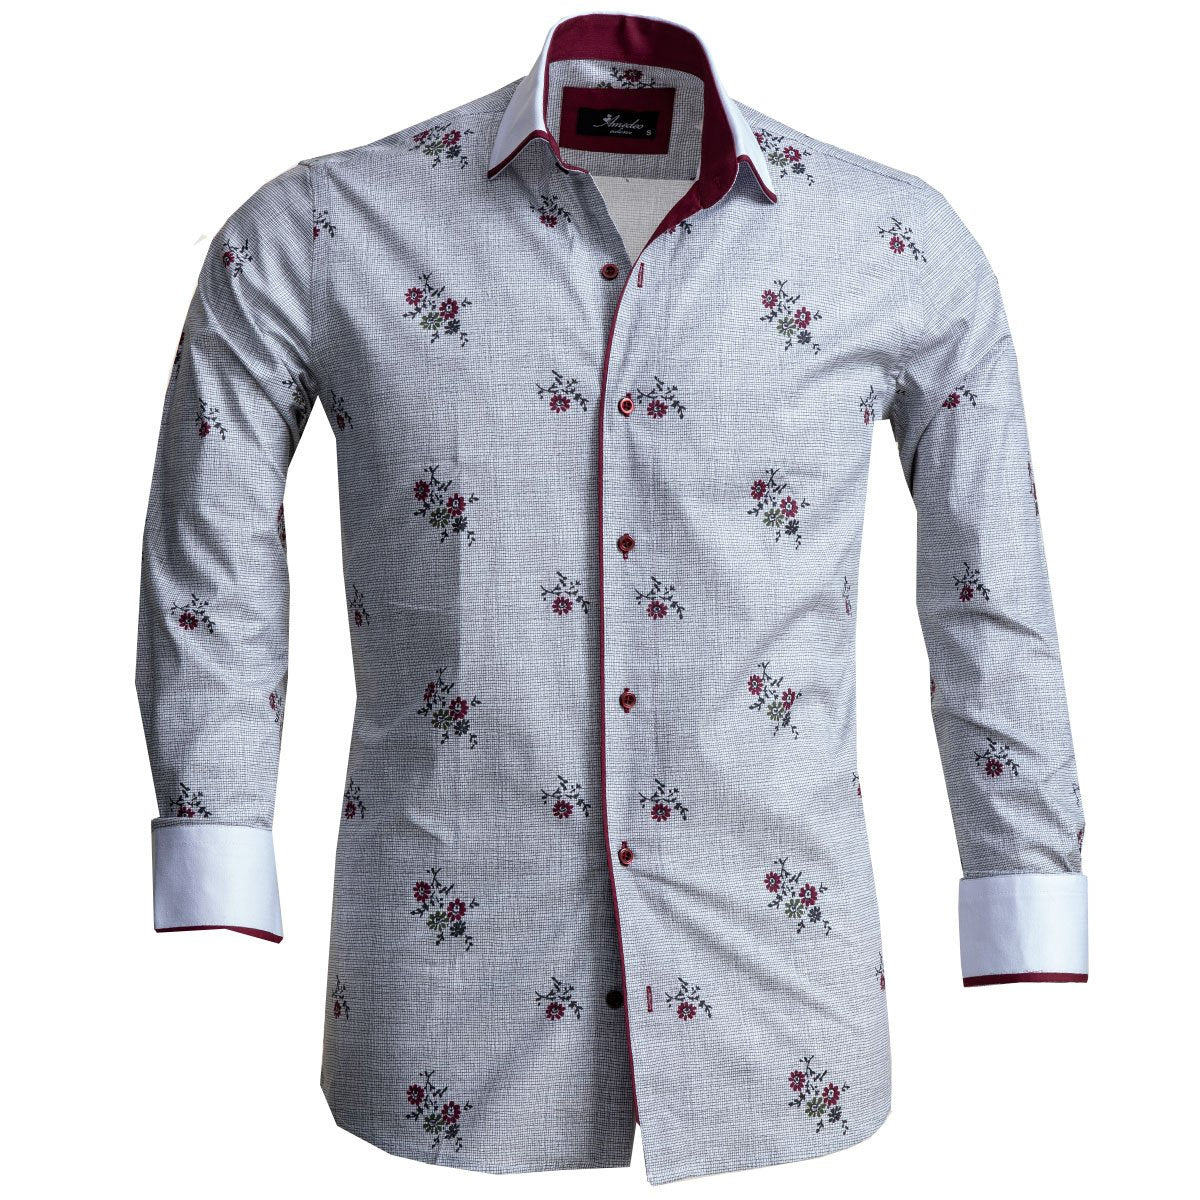 Grey Floral Mens Slim Fit Designer Dress Shirt - tailored Cotton Shirts for Work and Casual Wear - Amedeo Exclusive